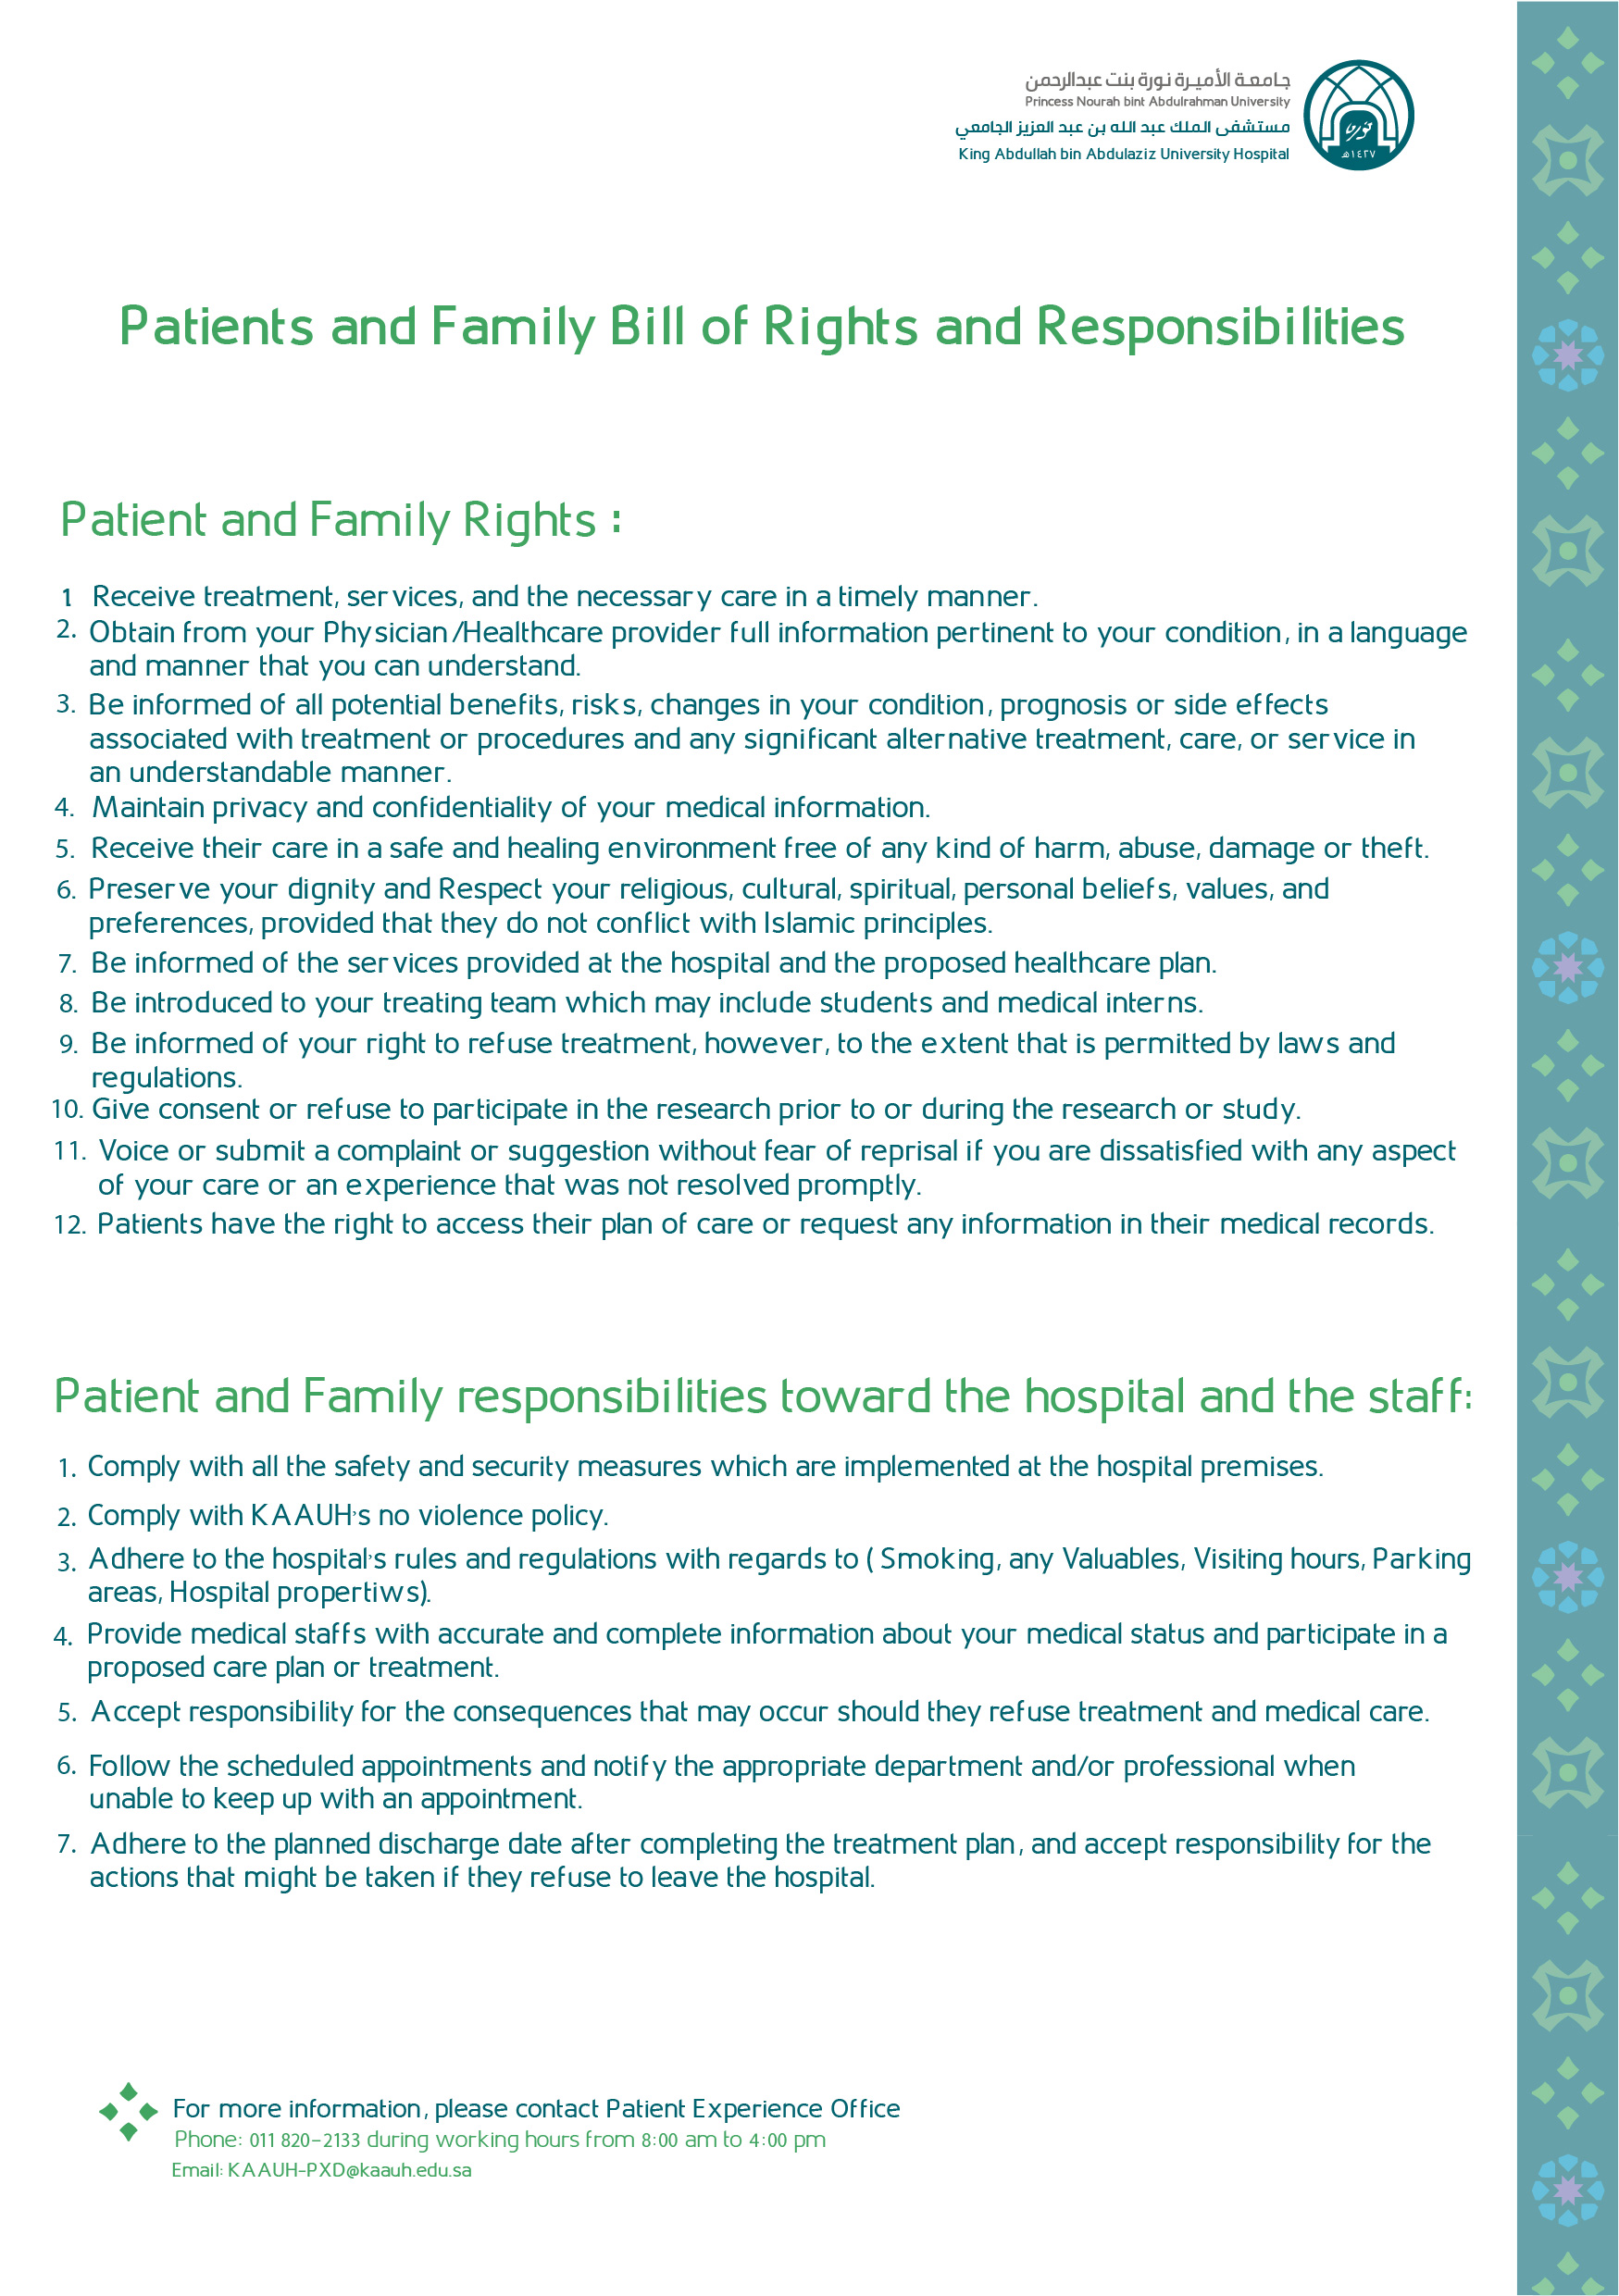 Patients Rights English.jpg